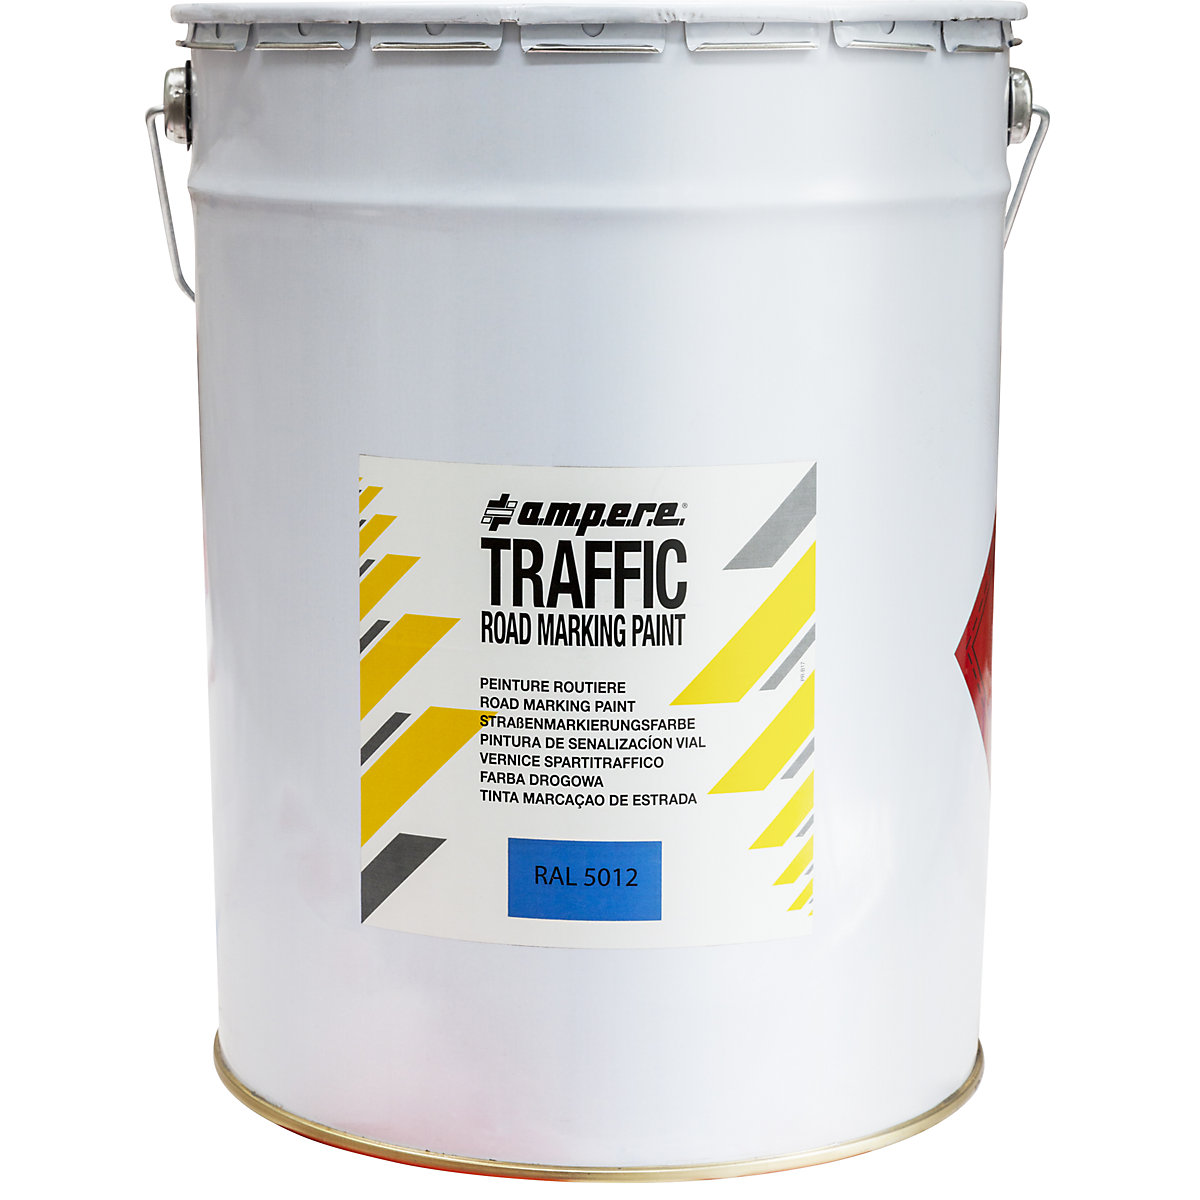 Road marking paint – Ampere